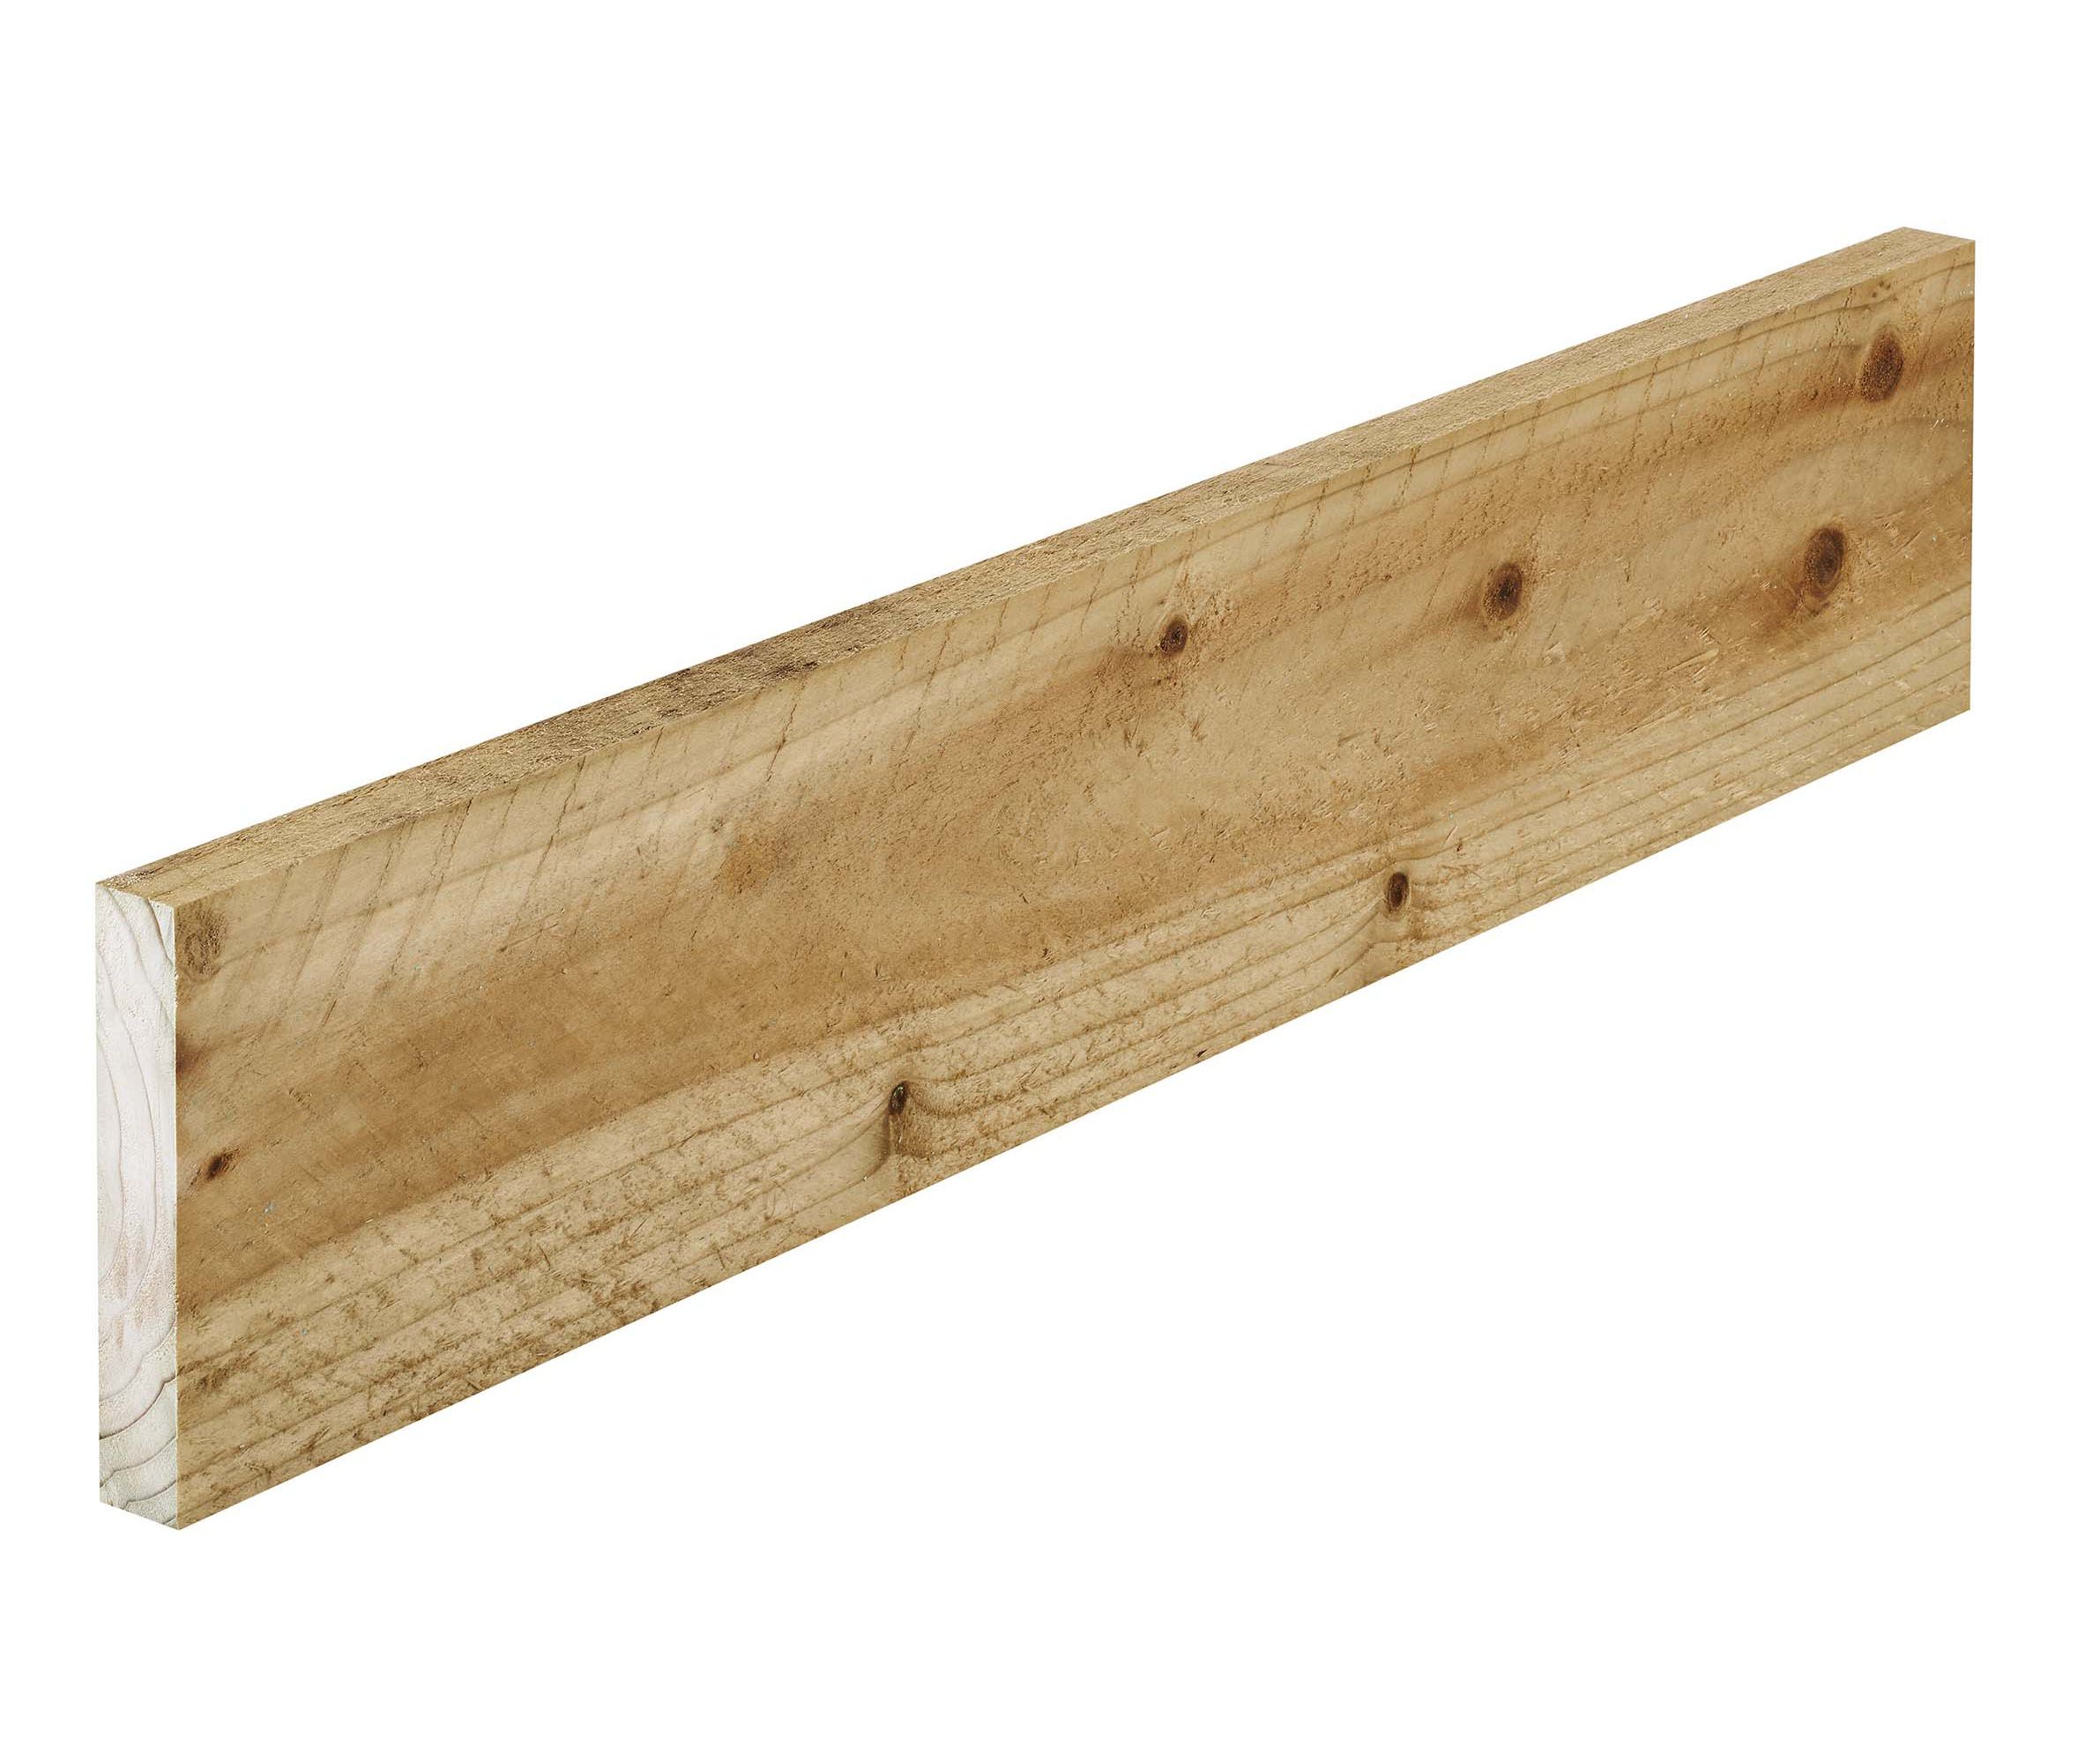 Treated Whitewood Timber (L)1.8m (W)100mm (T)22mm, Pack of 8